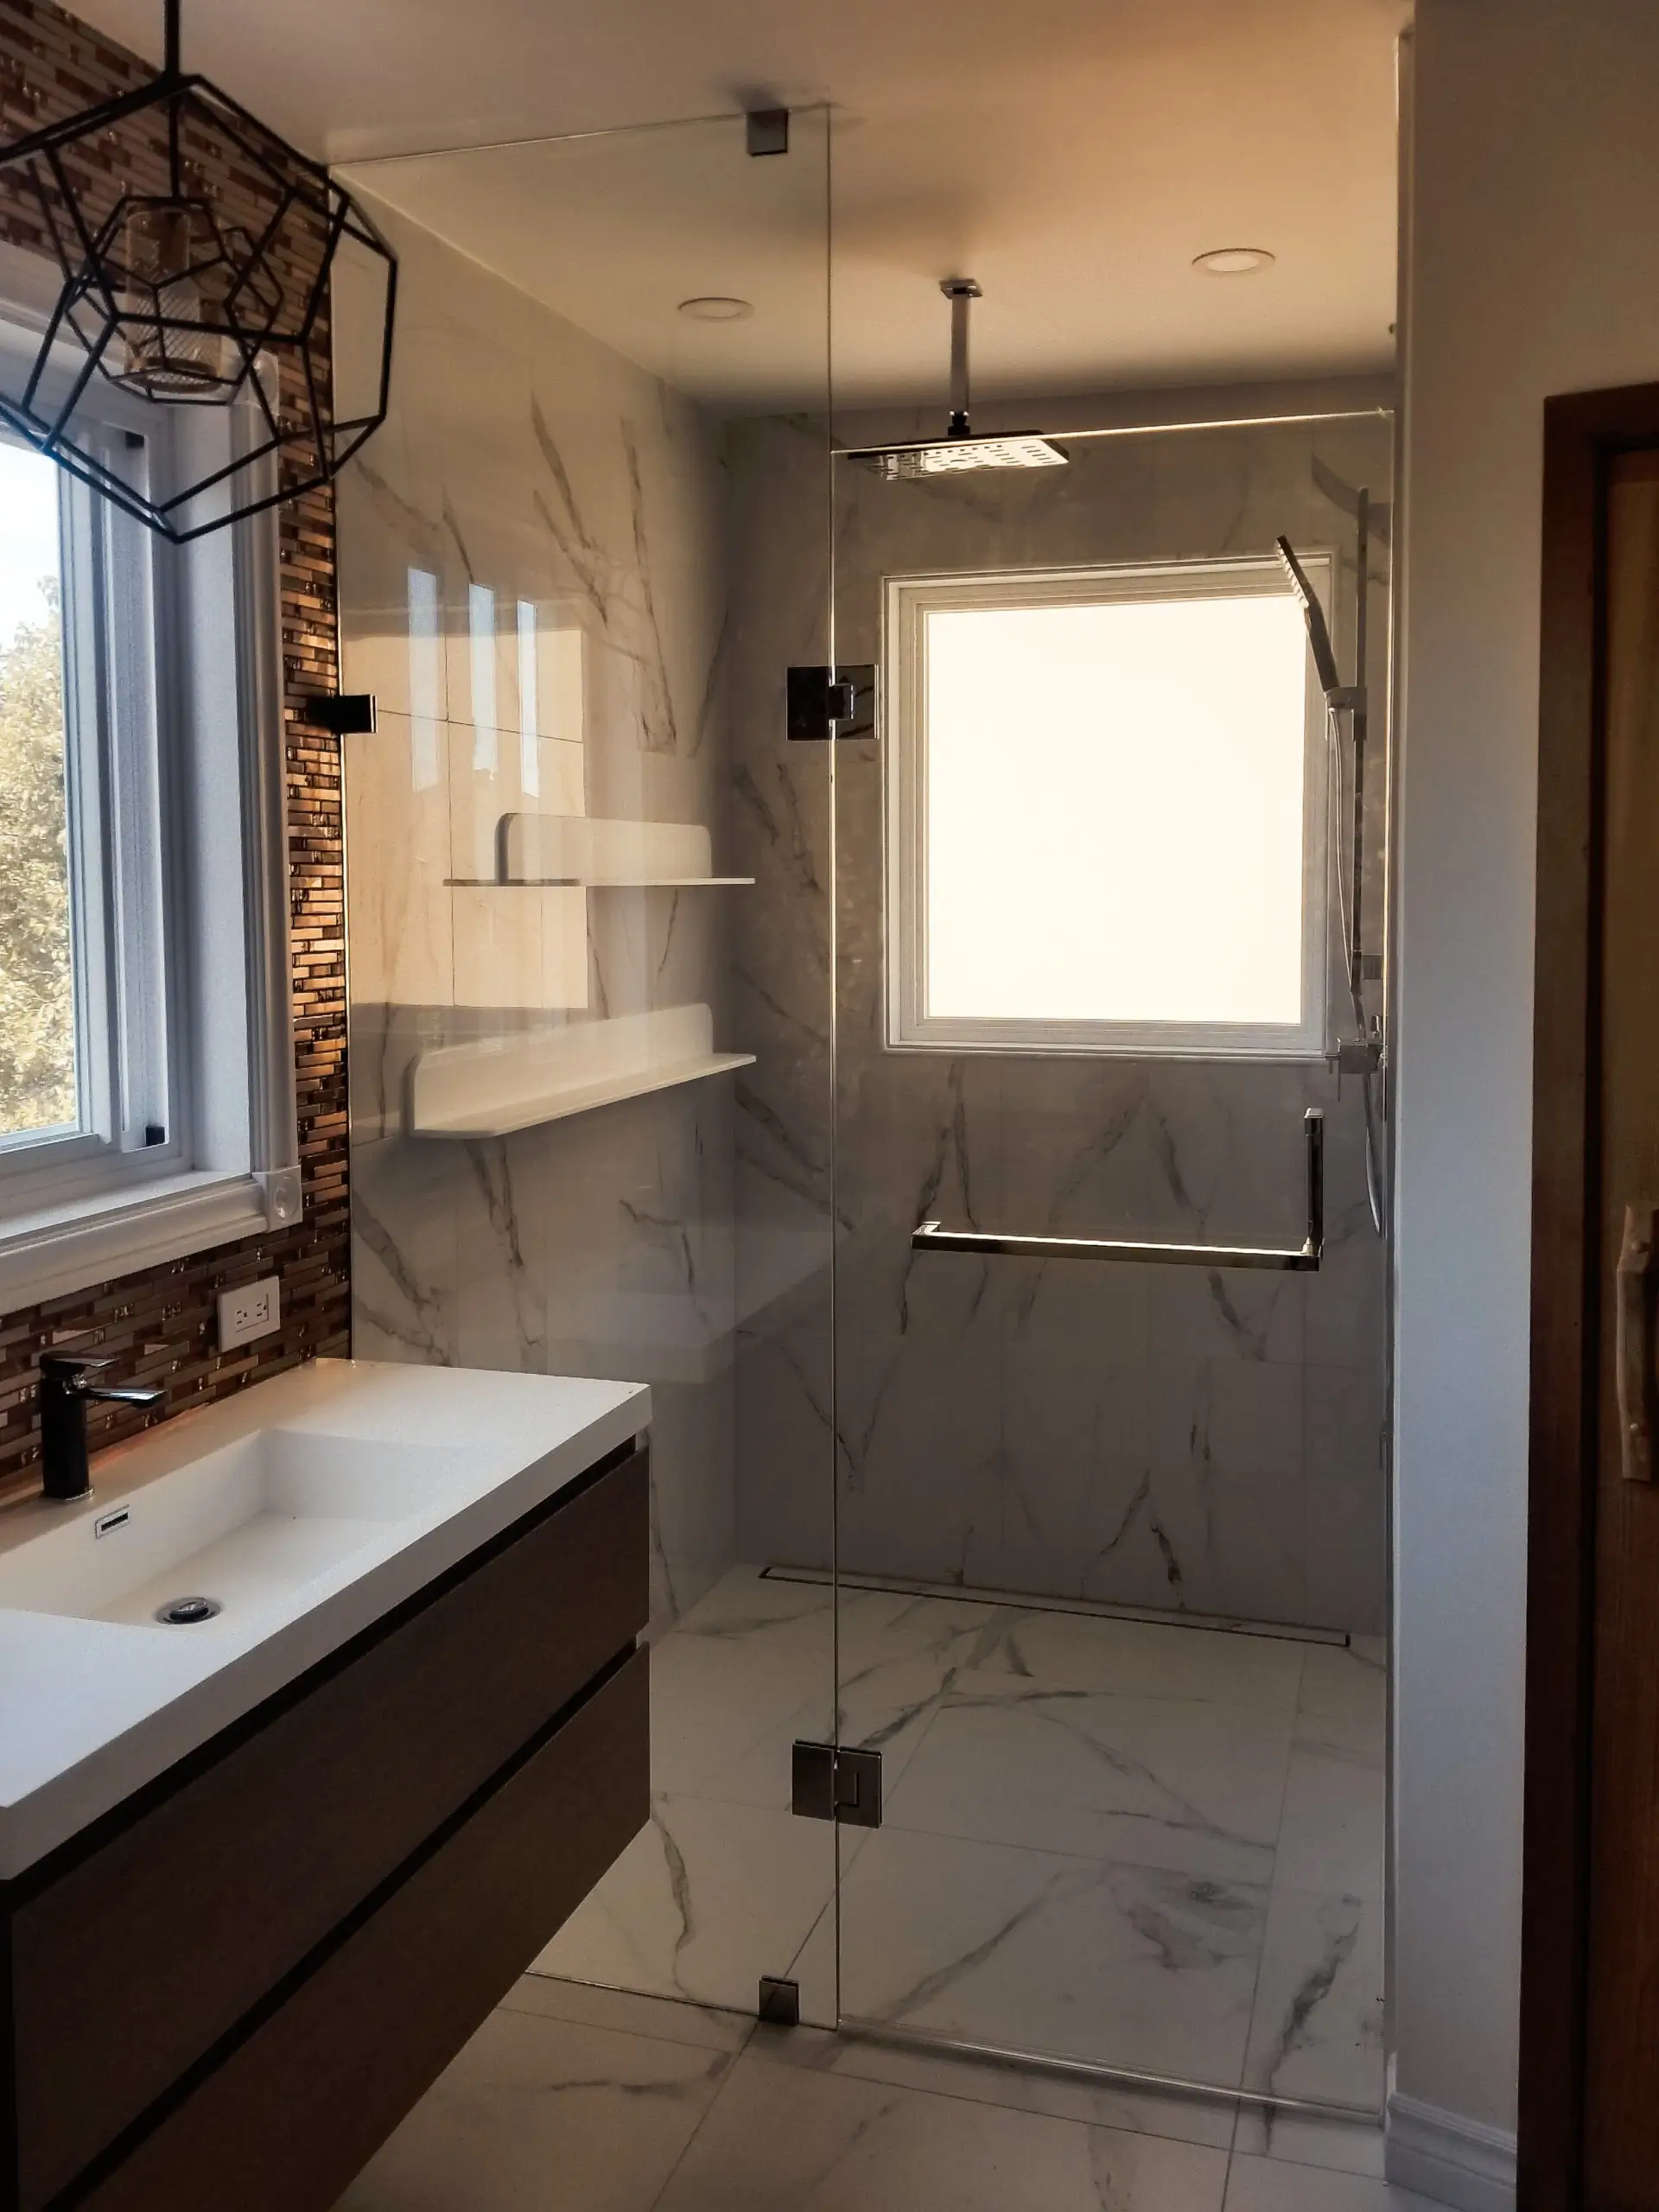 How to choose a shower enclosure? 1